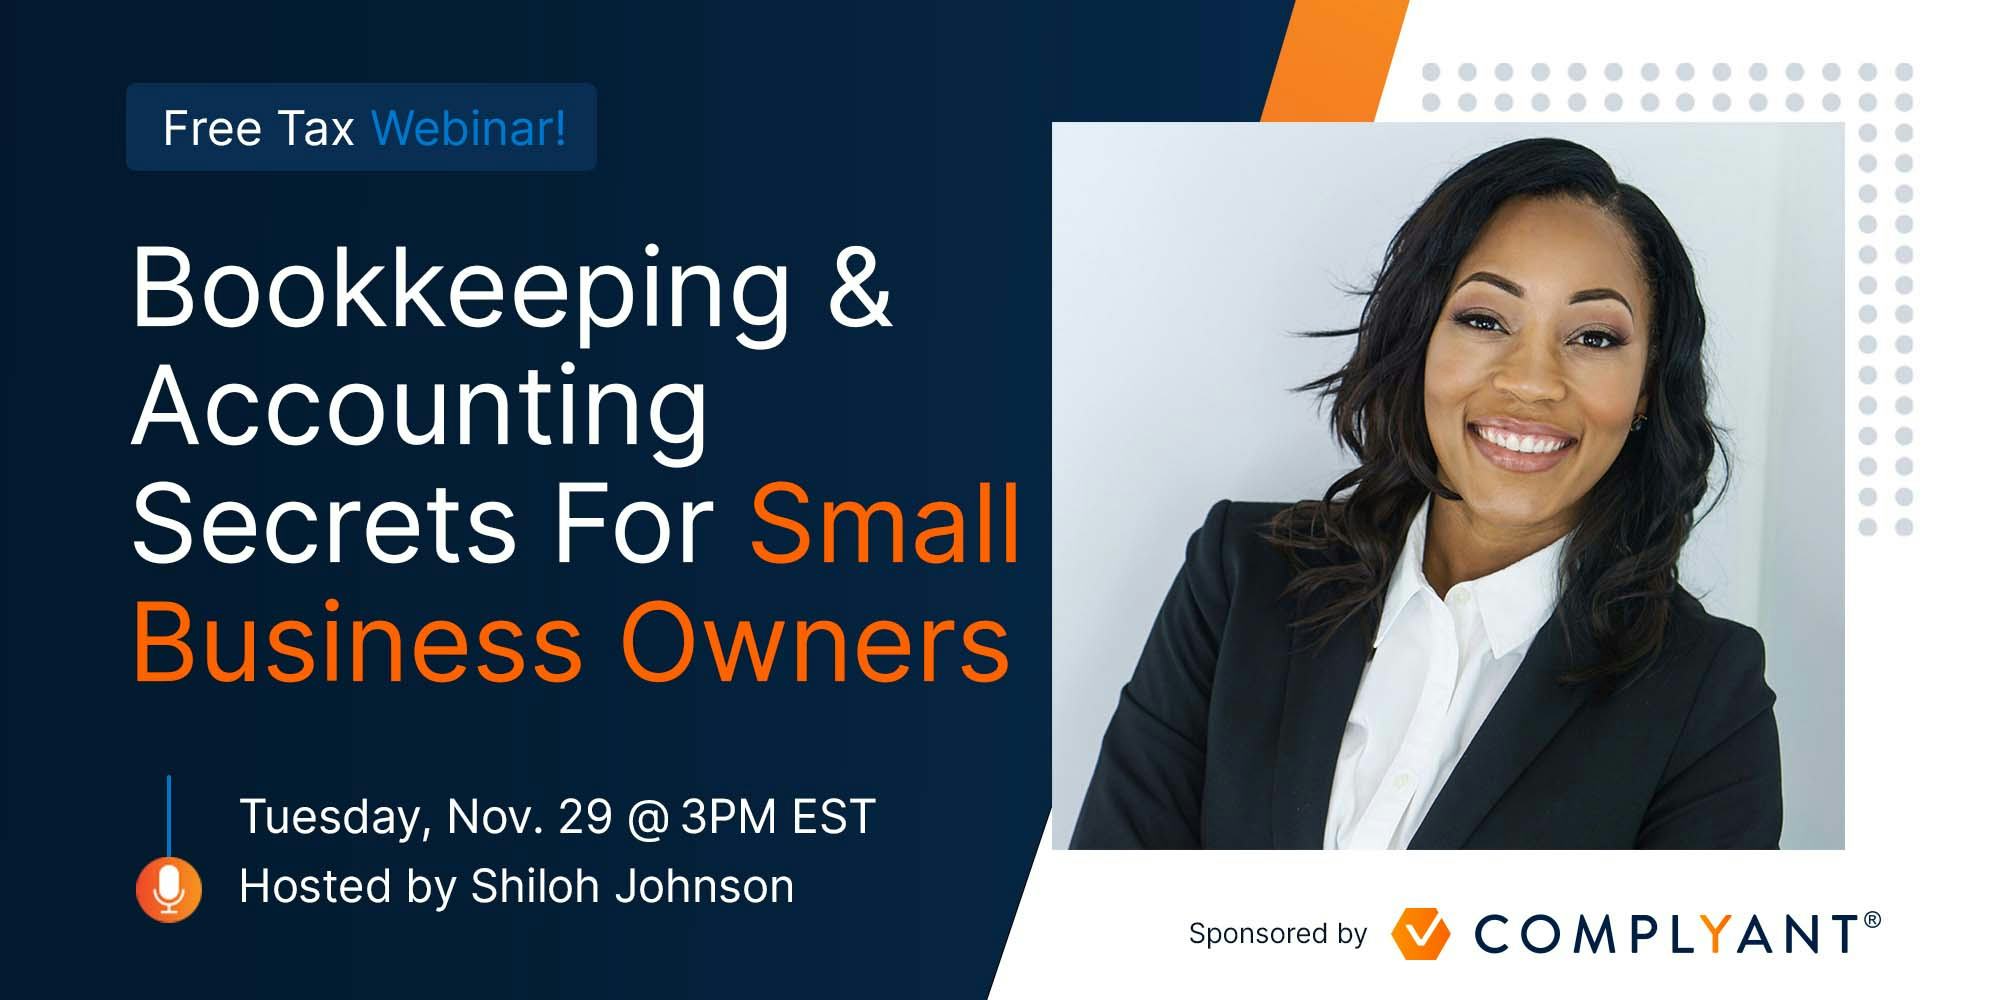 Bookkeeping & Accounting Secrets for Small Business Owners